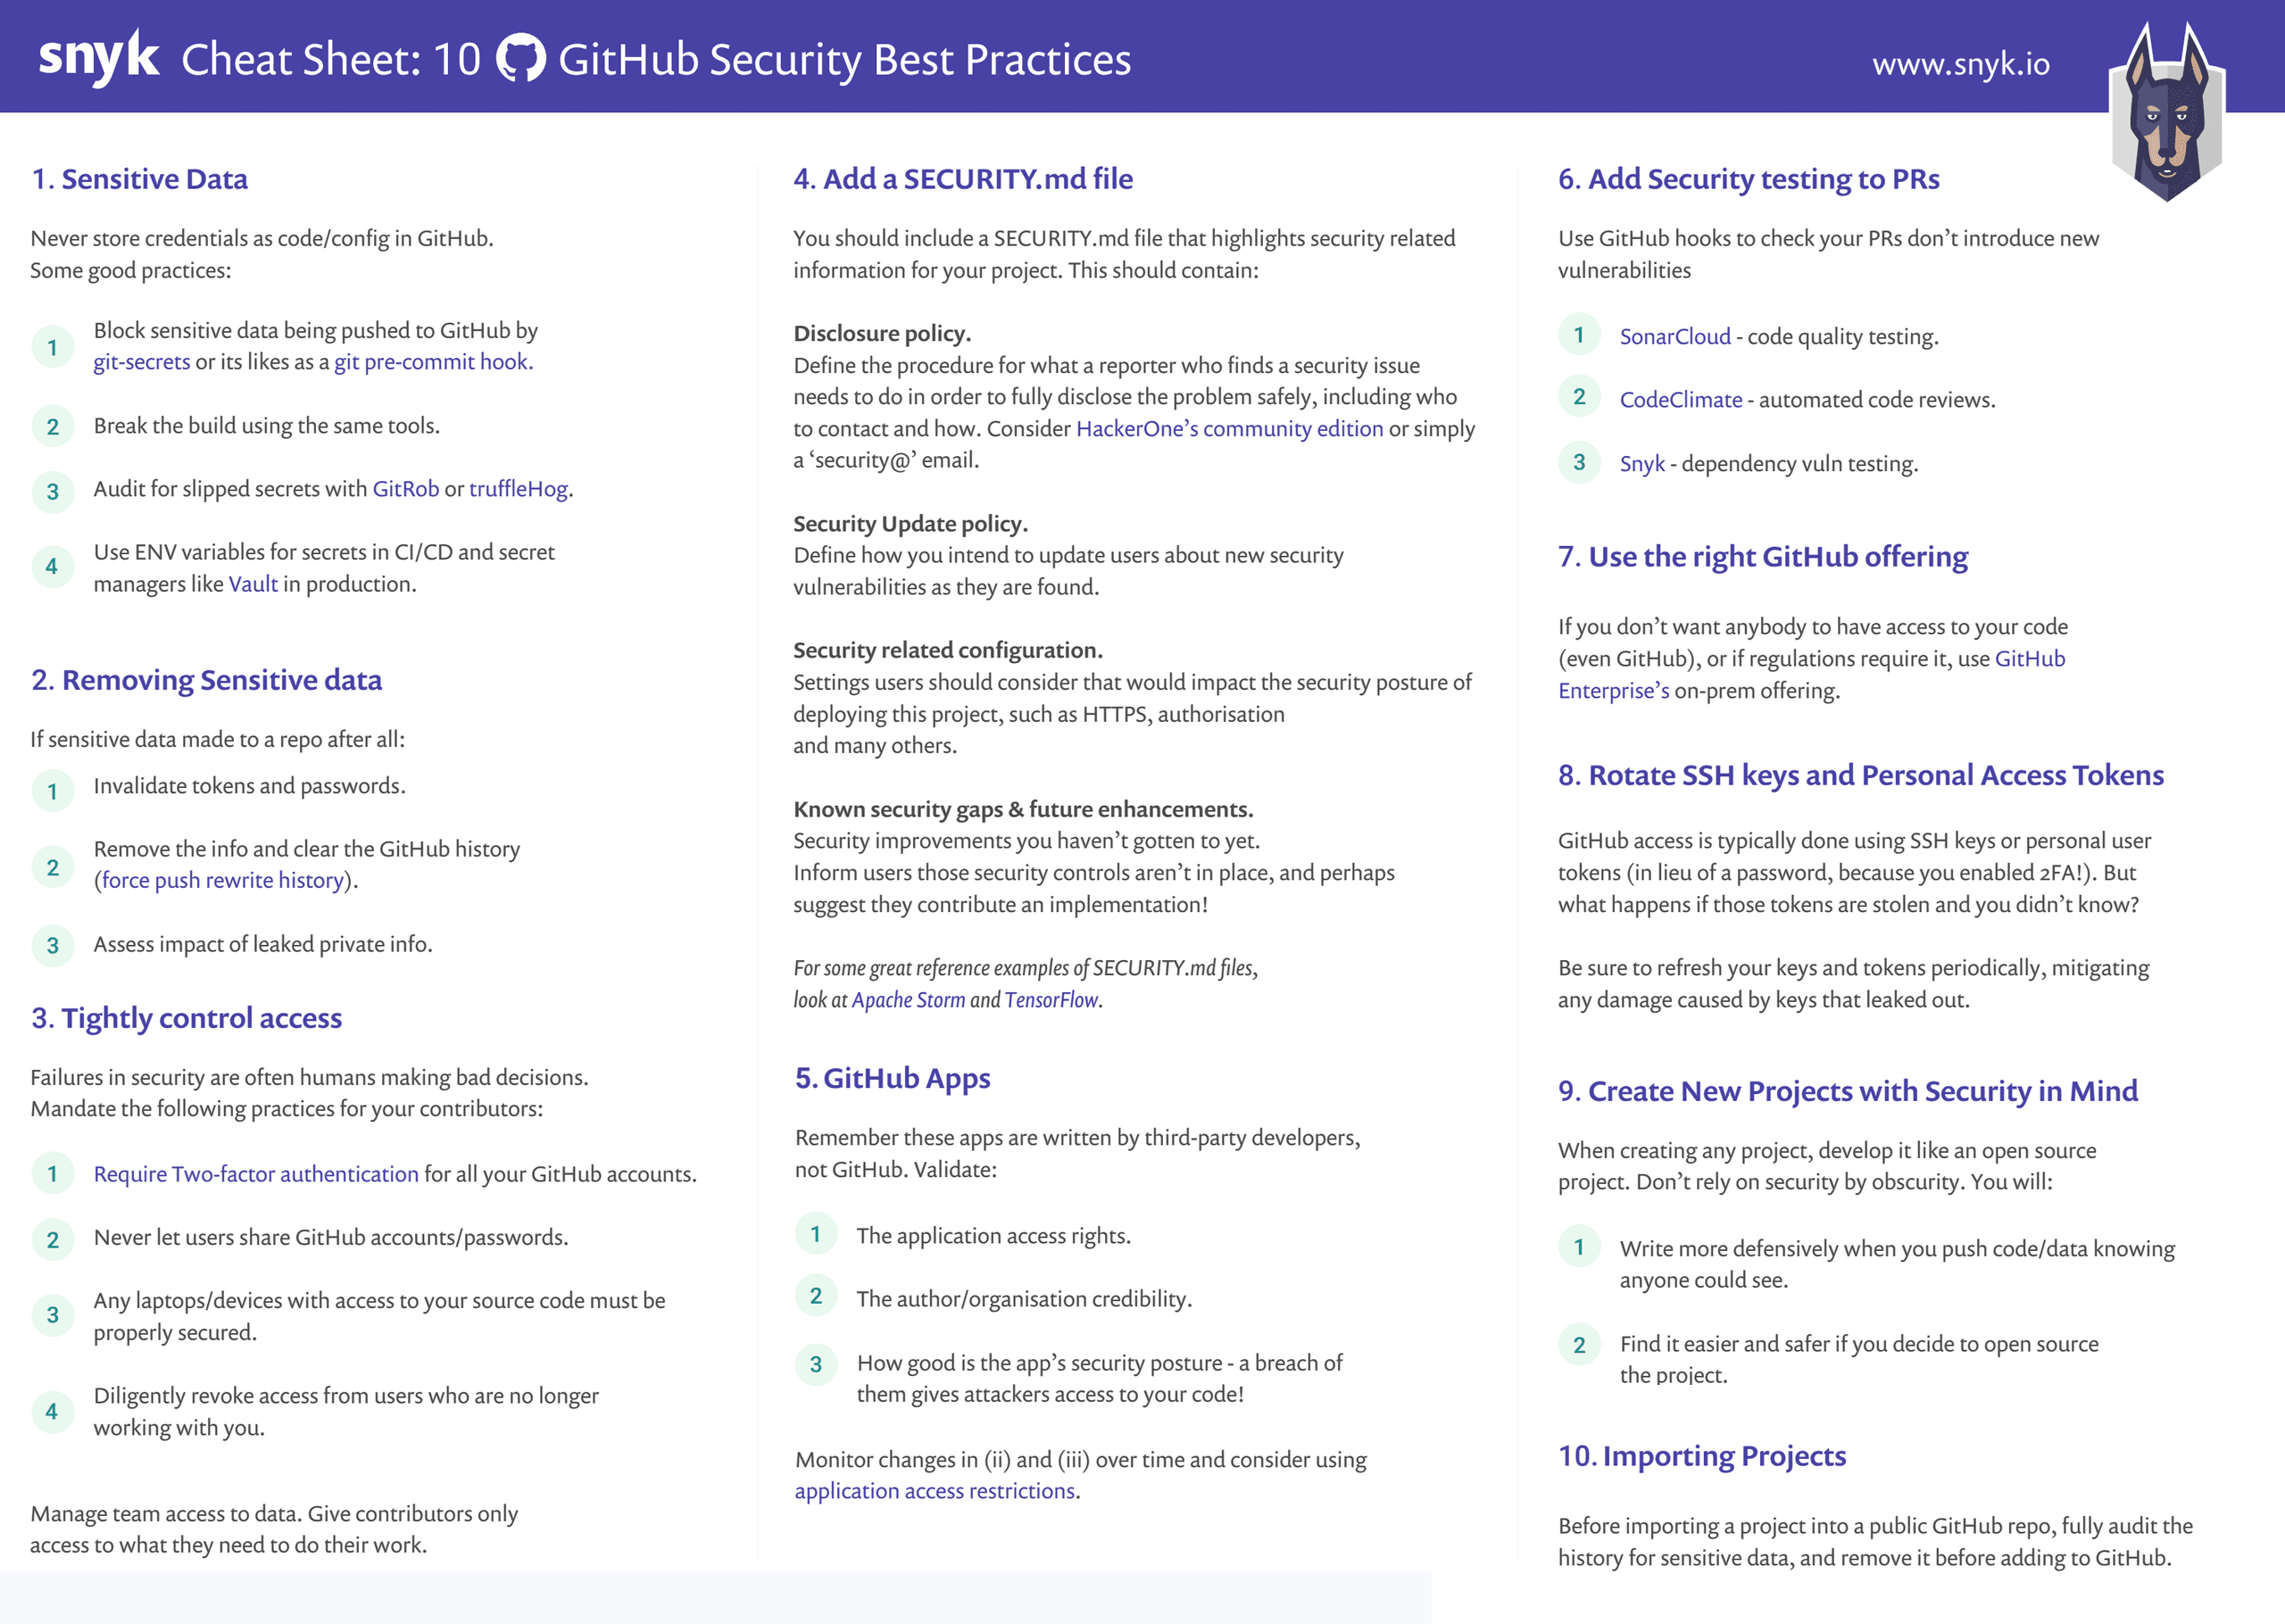 blog/10_GitHub_Security_Best_Practices_cheat_sheet